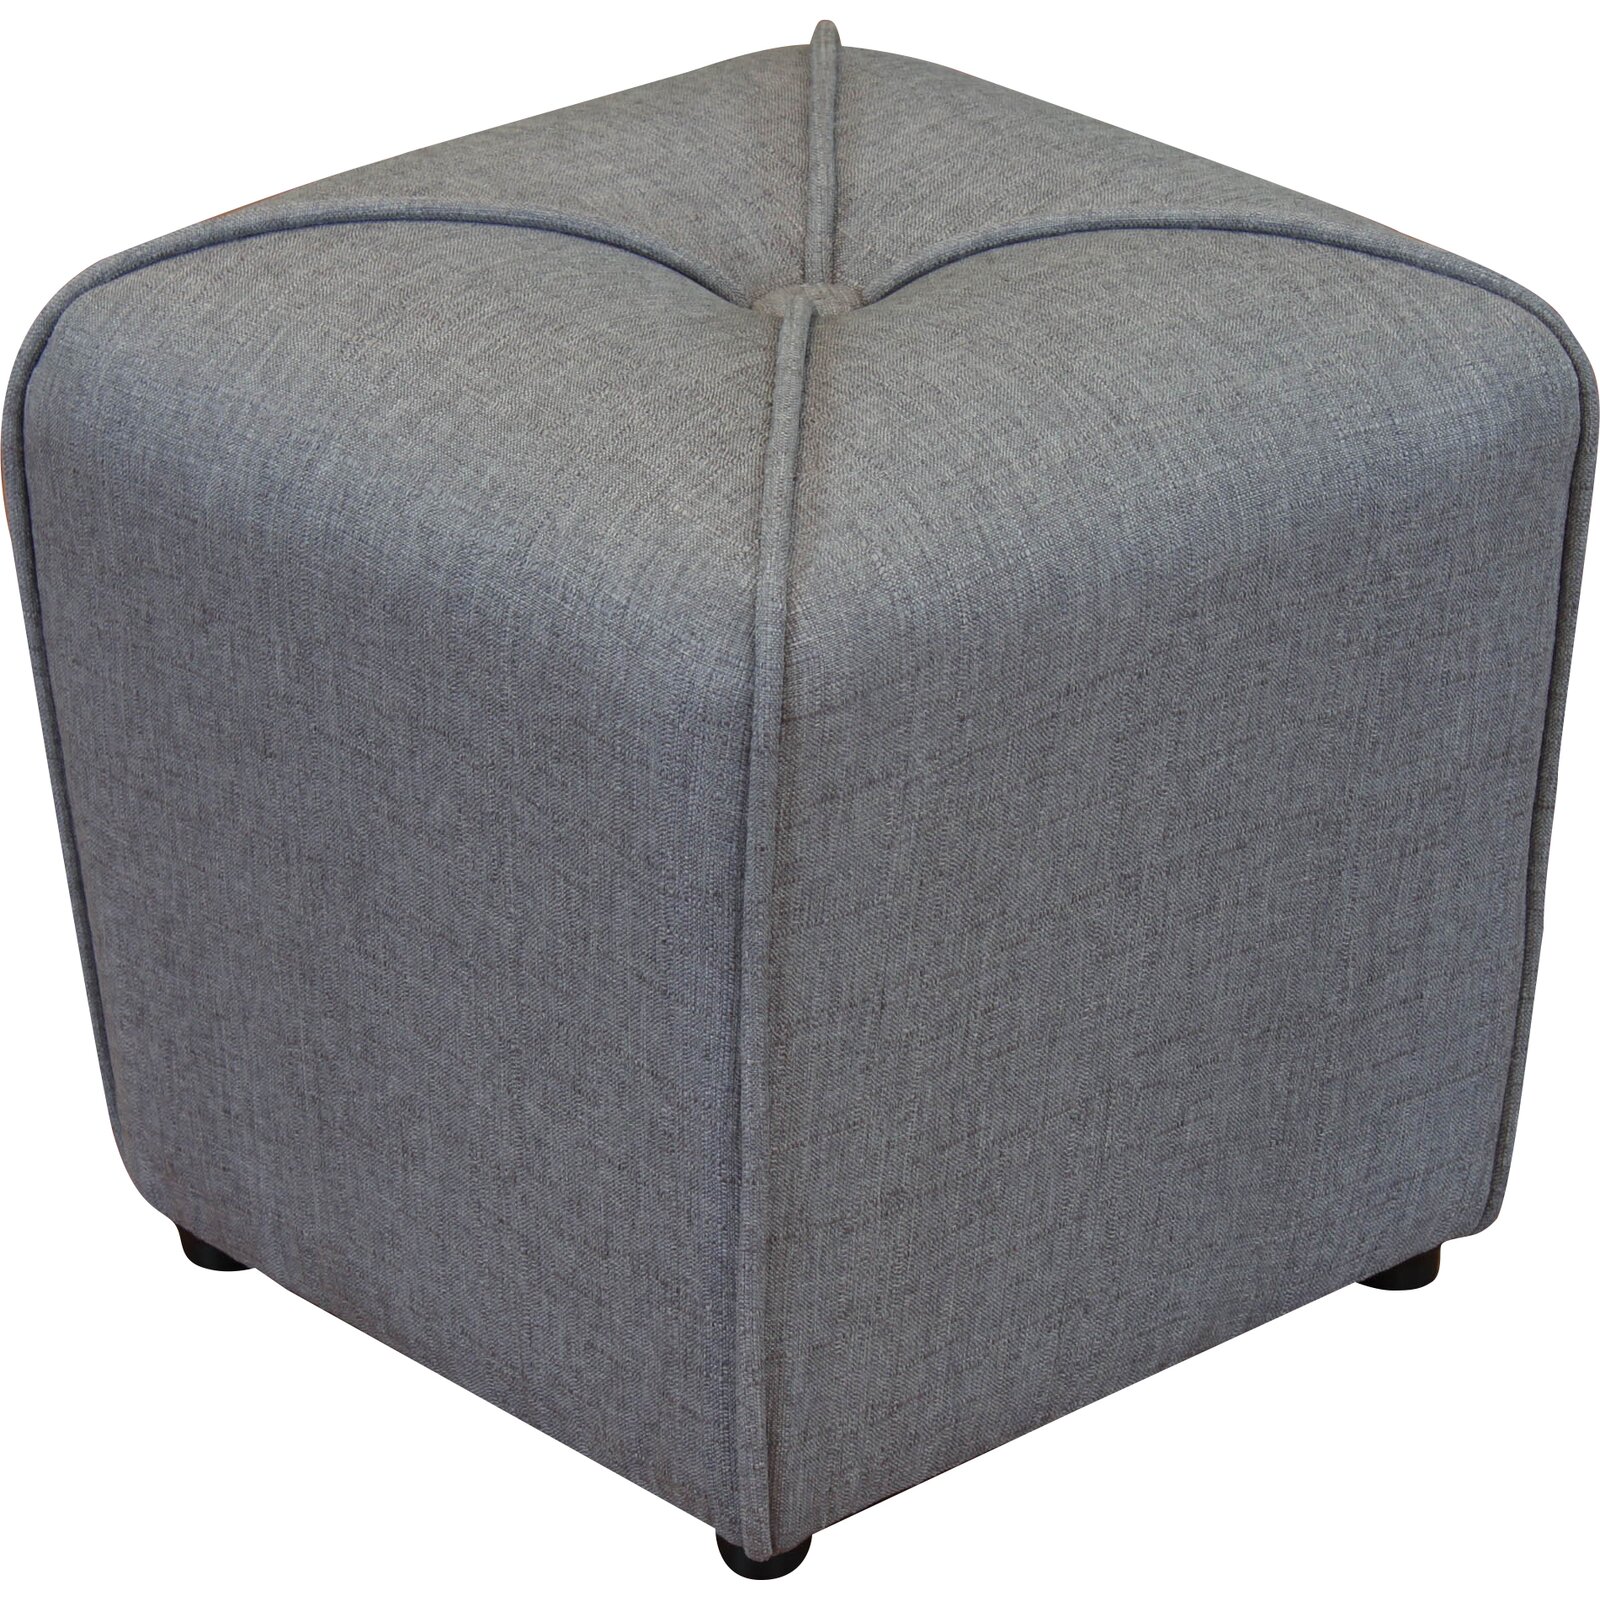 Quane 16.5" Tufted Square Cube Ottoman, Shape: Square, Weight Capacity: 150 - image 4 of 5